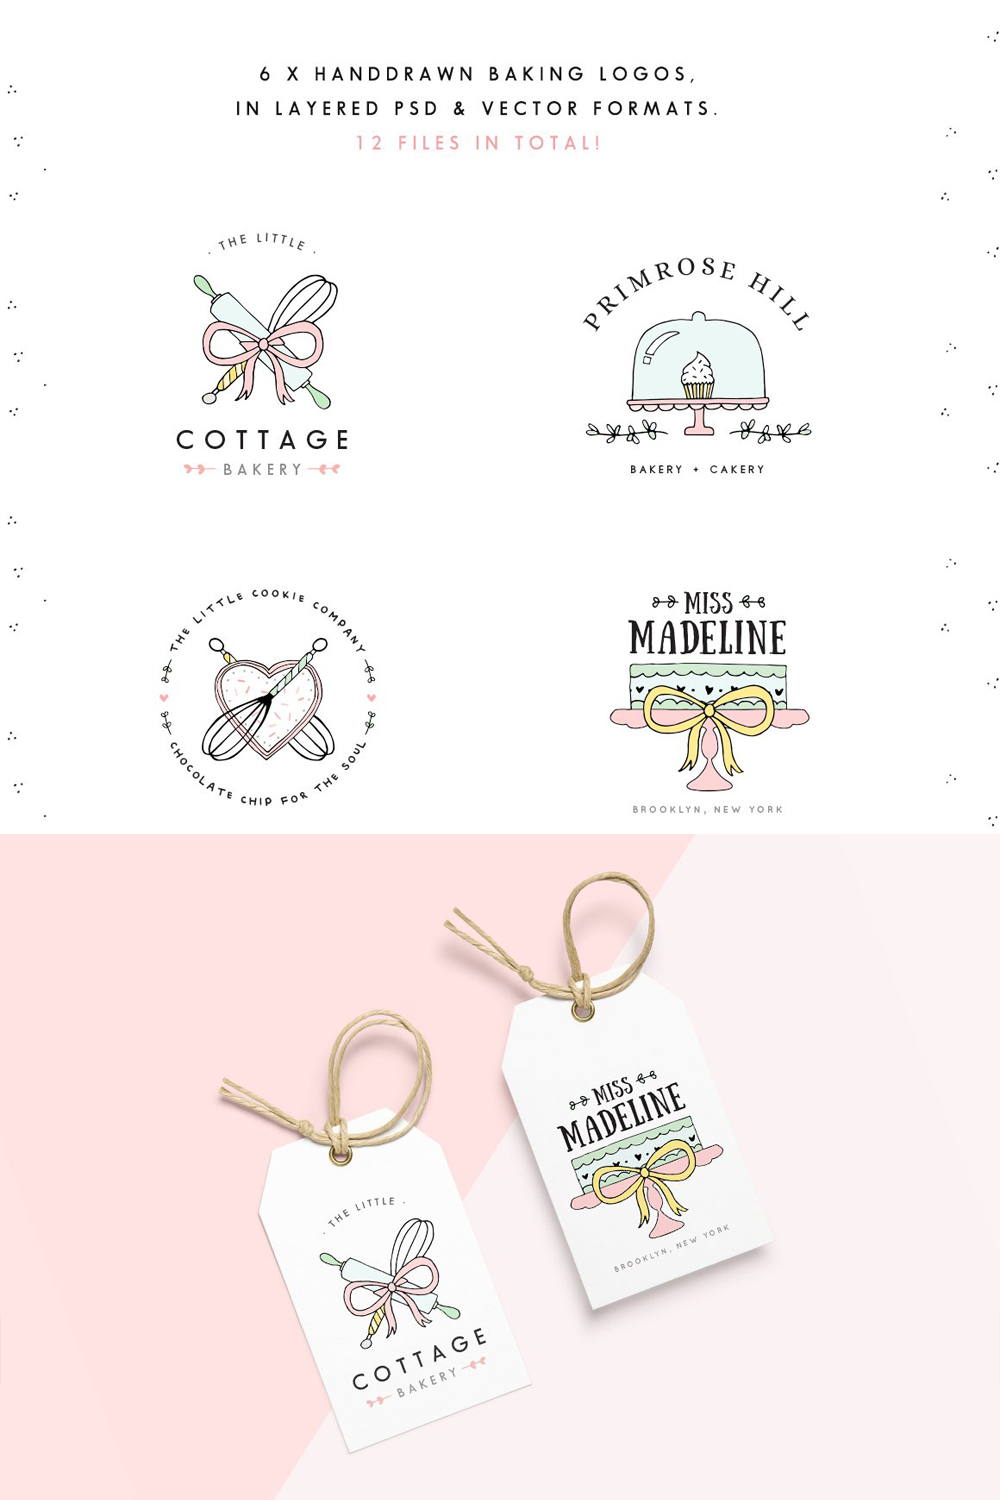 6 X Handdrawn baking logos, in layered PSD & Vector Formats, 12 files in total.